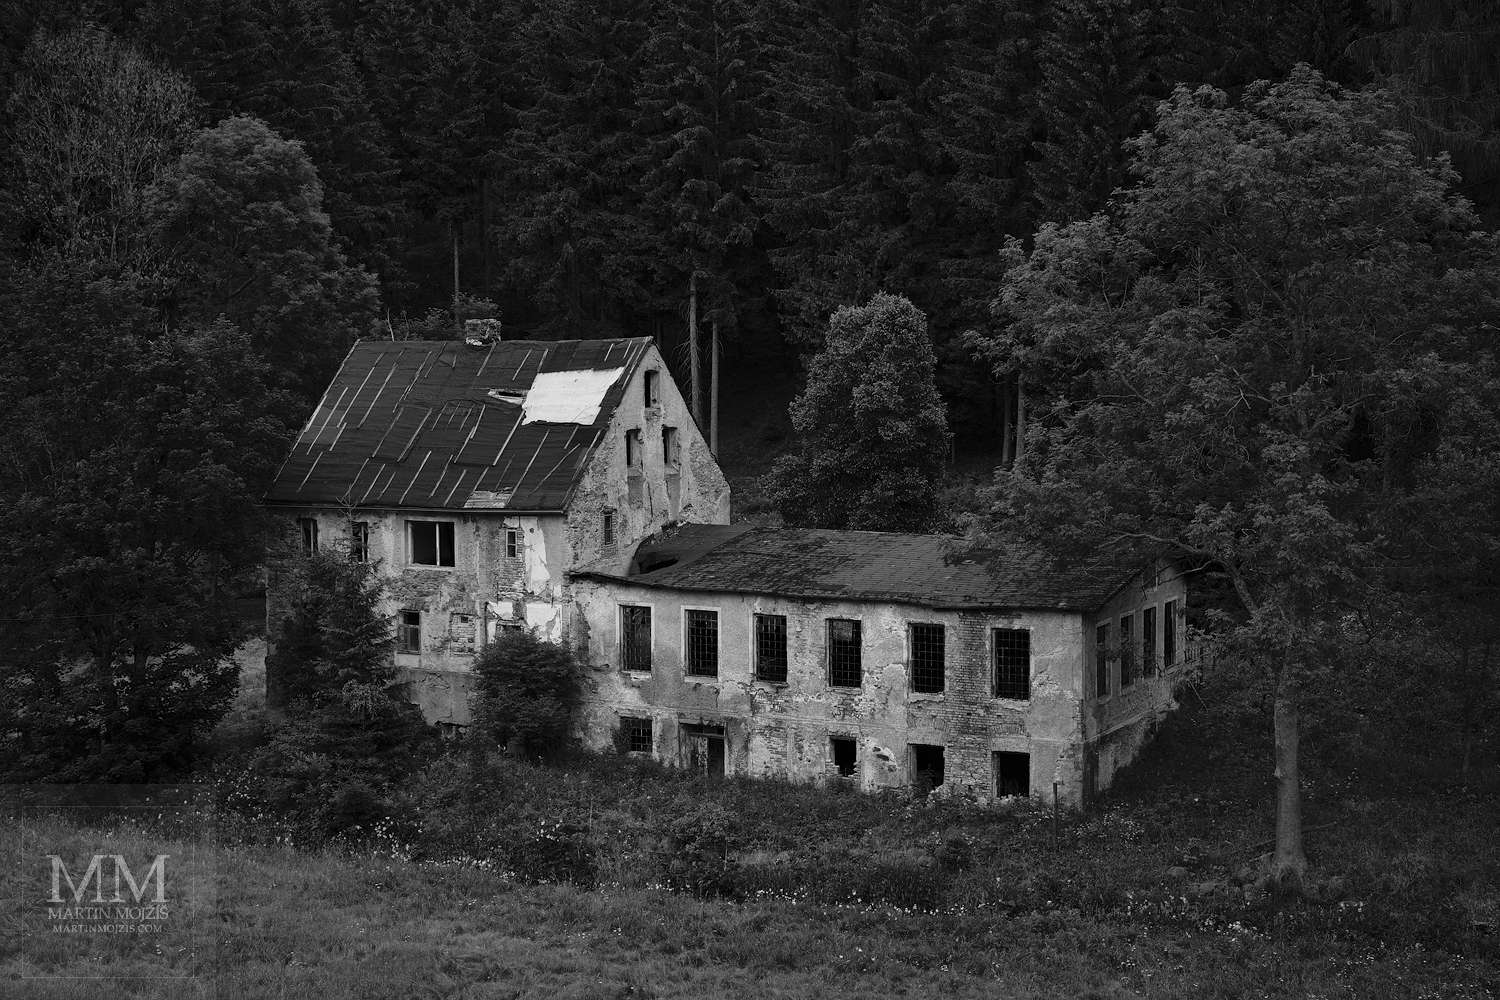 Fine Art black and white large format photograph of the old house in a valley. Martin Mojzis.